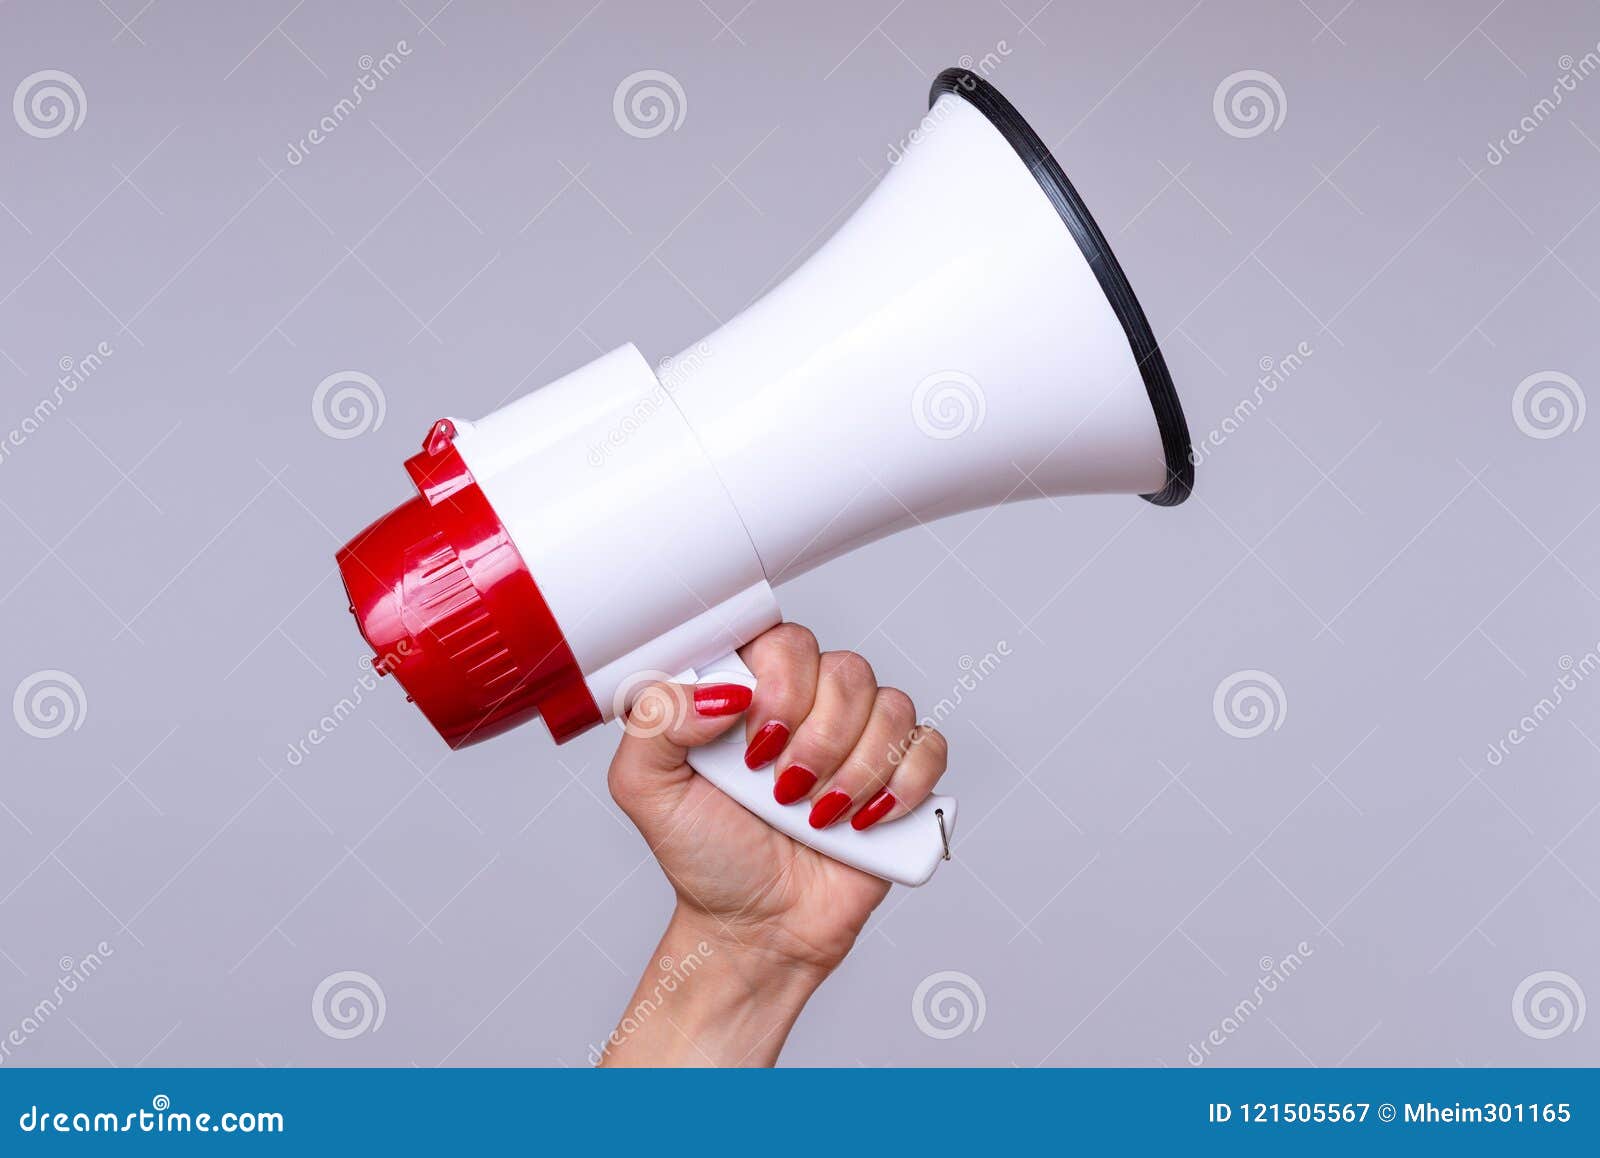 woman holding up a loud hailer or megaphone